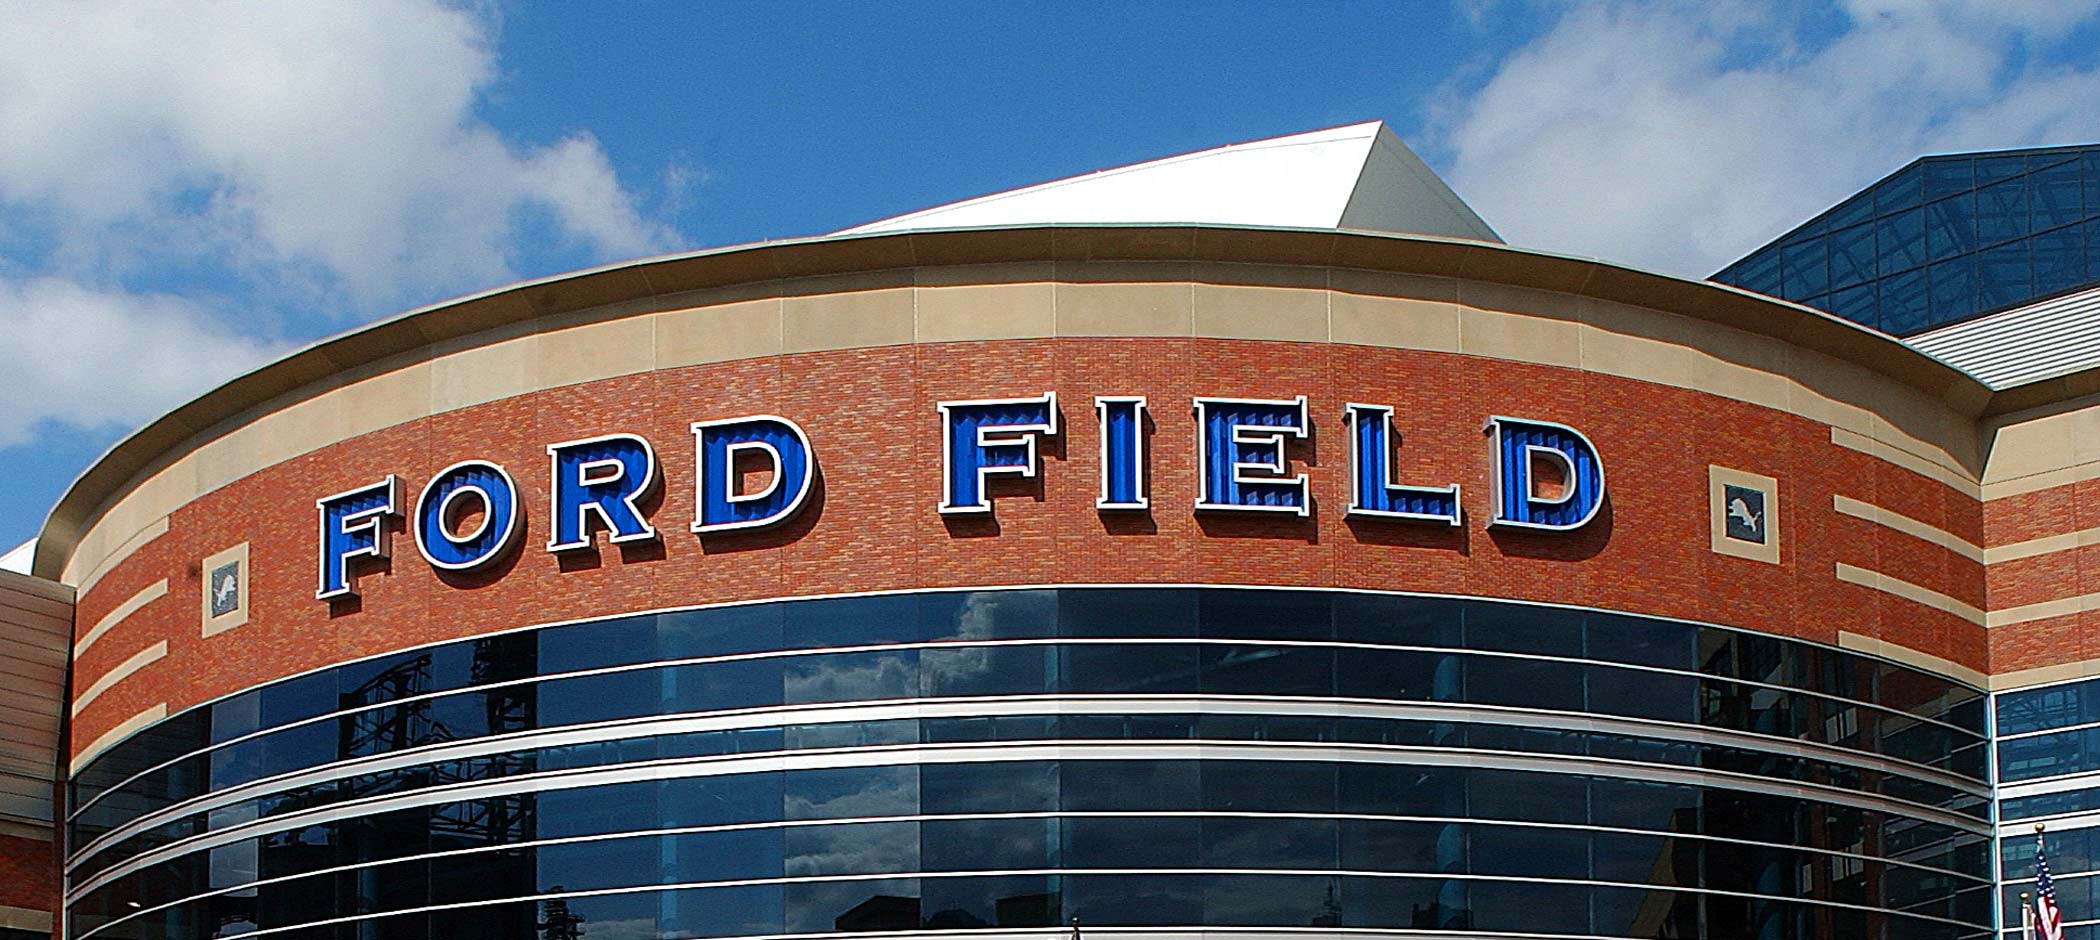 Detroit to Host 2027 NCAA® Men’s Final Four® at Ford Field